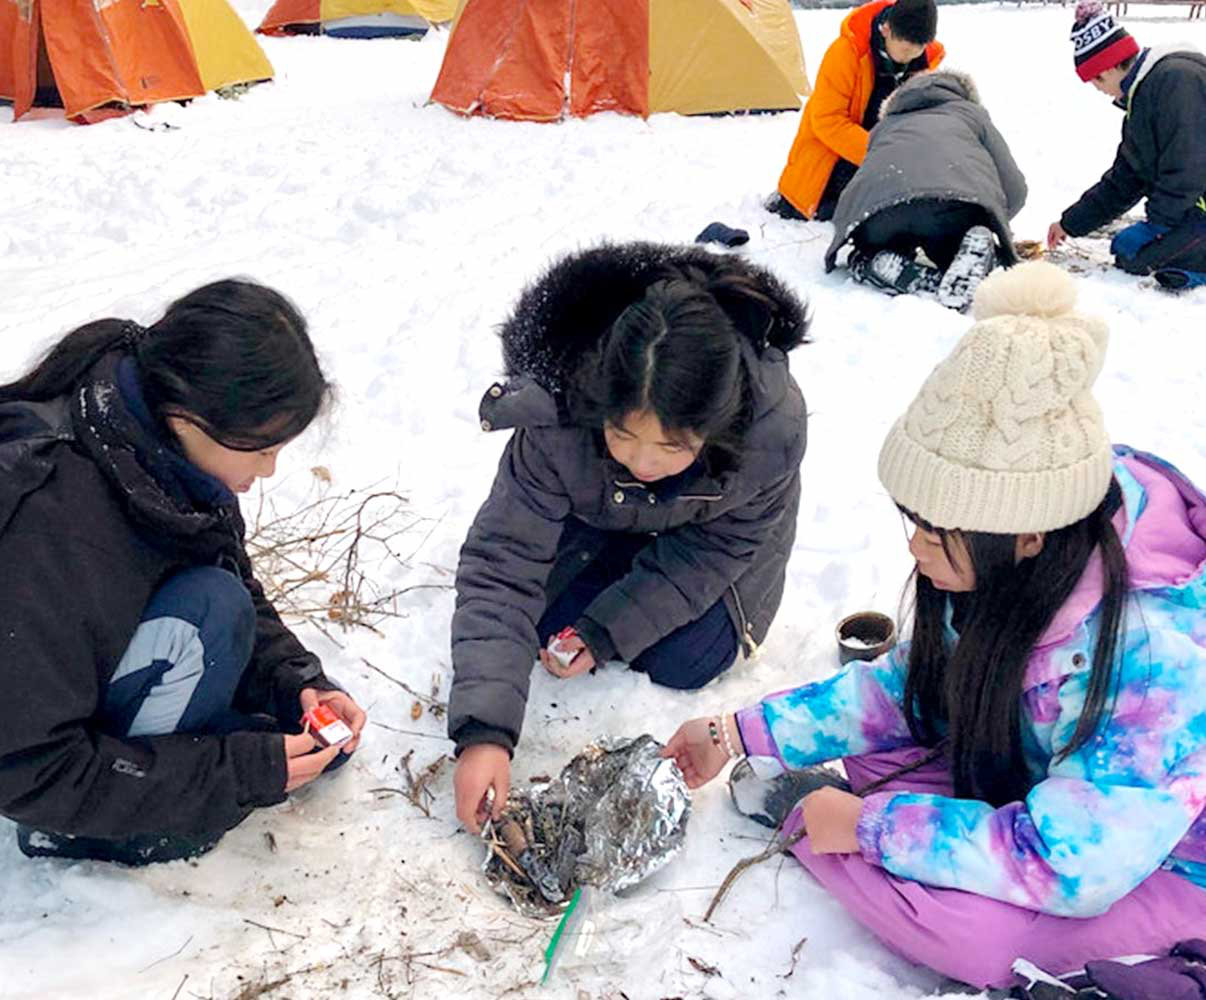 Three young girl Scouts making fire in the snow.